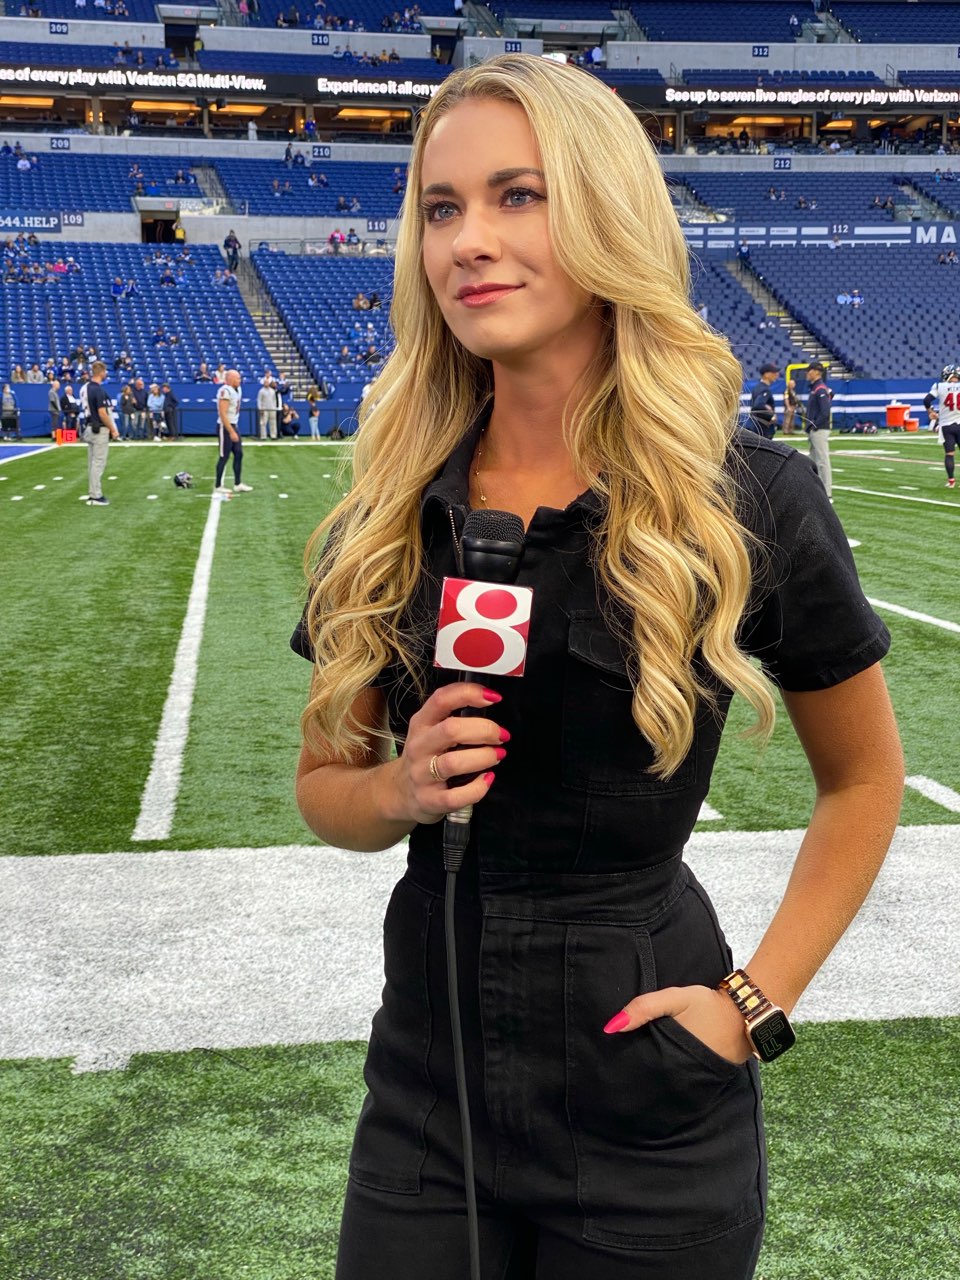 Olivia Ray Shares What It’s Really Like Being a Female Sportscaster